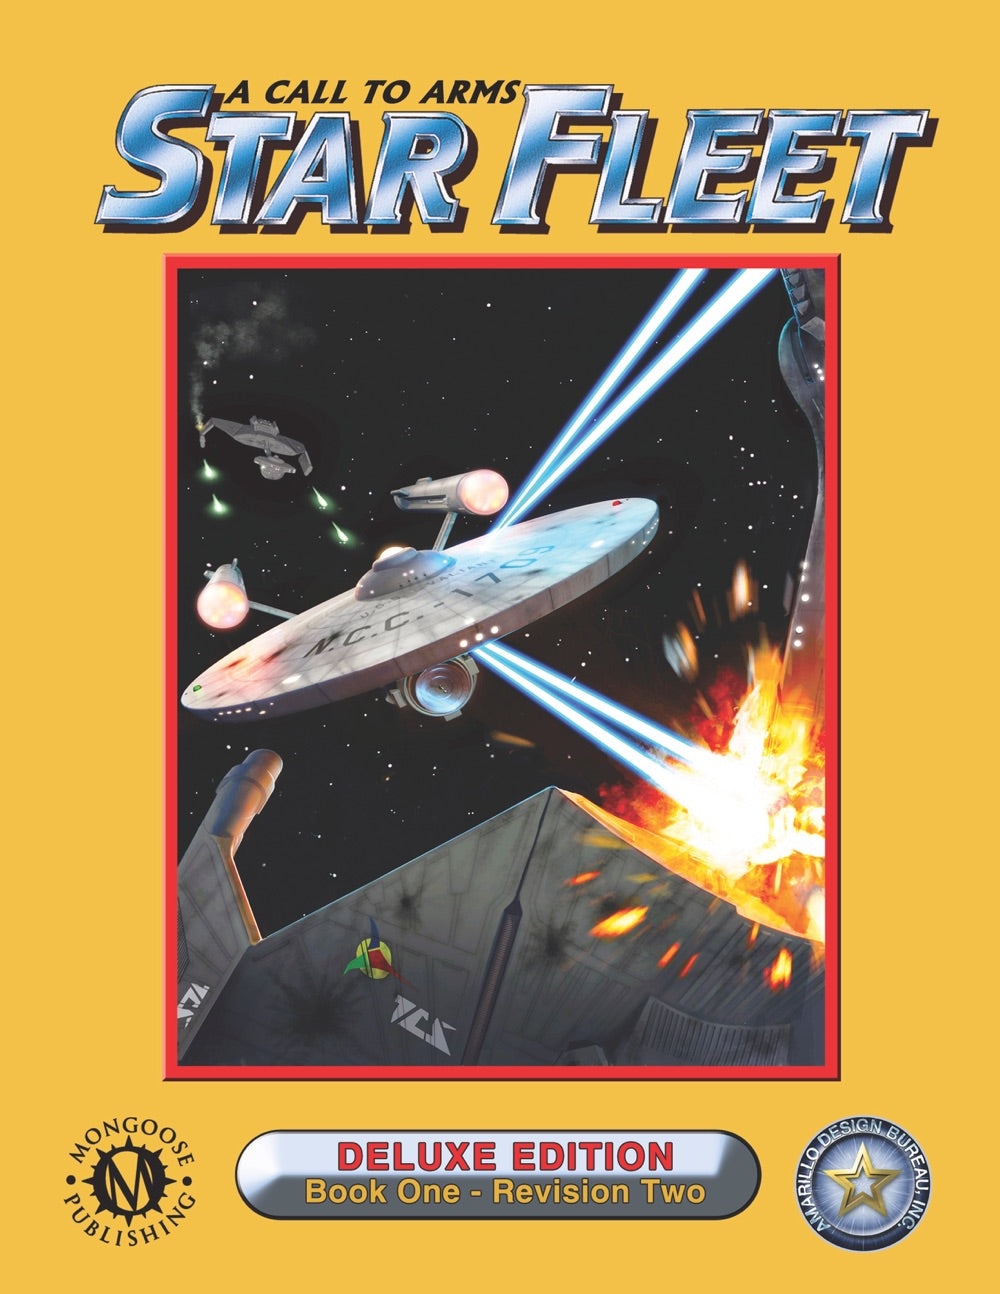 A Call to Arms: Star Fleet, Book One, Revision Two, Deluxe Edition